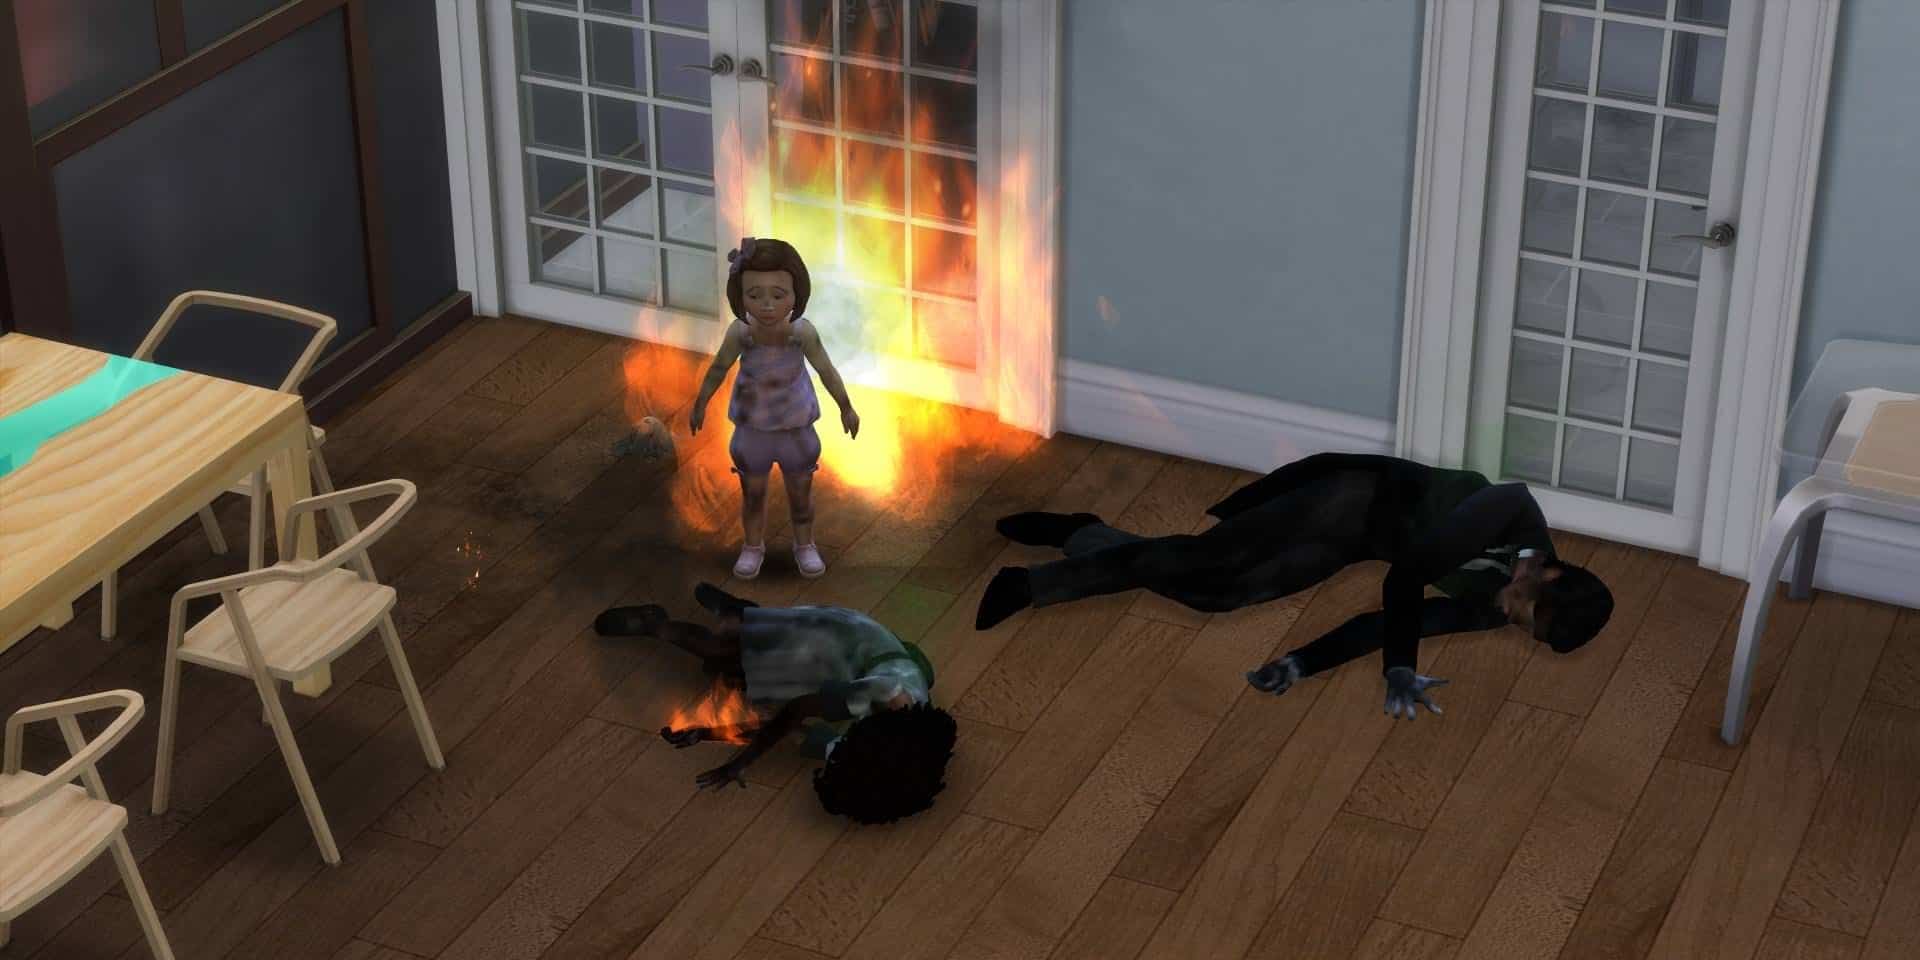 A child is dying in The Sims 4.